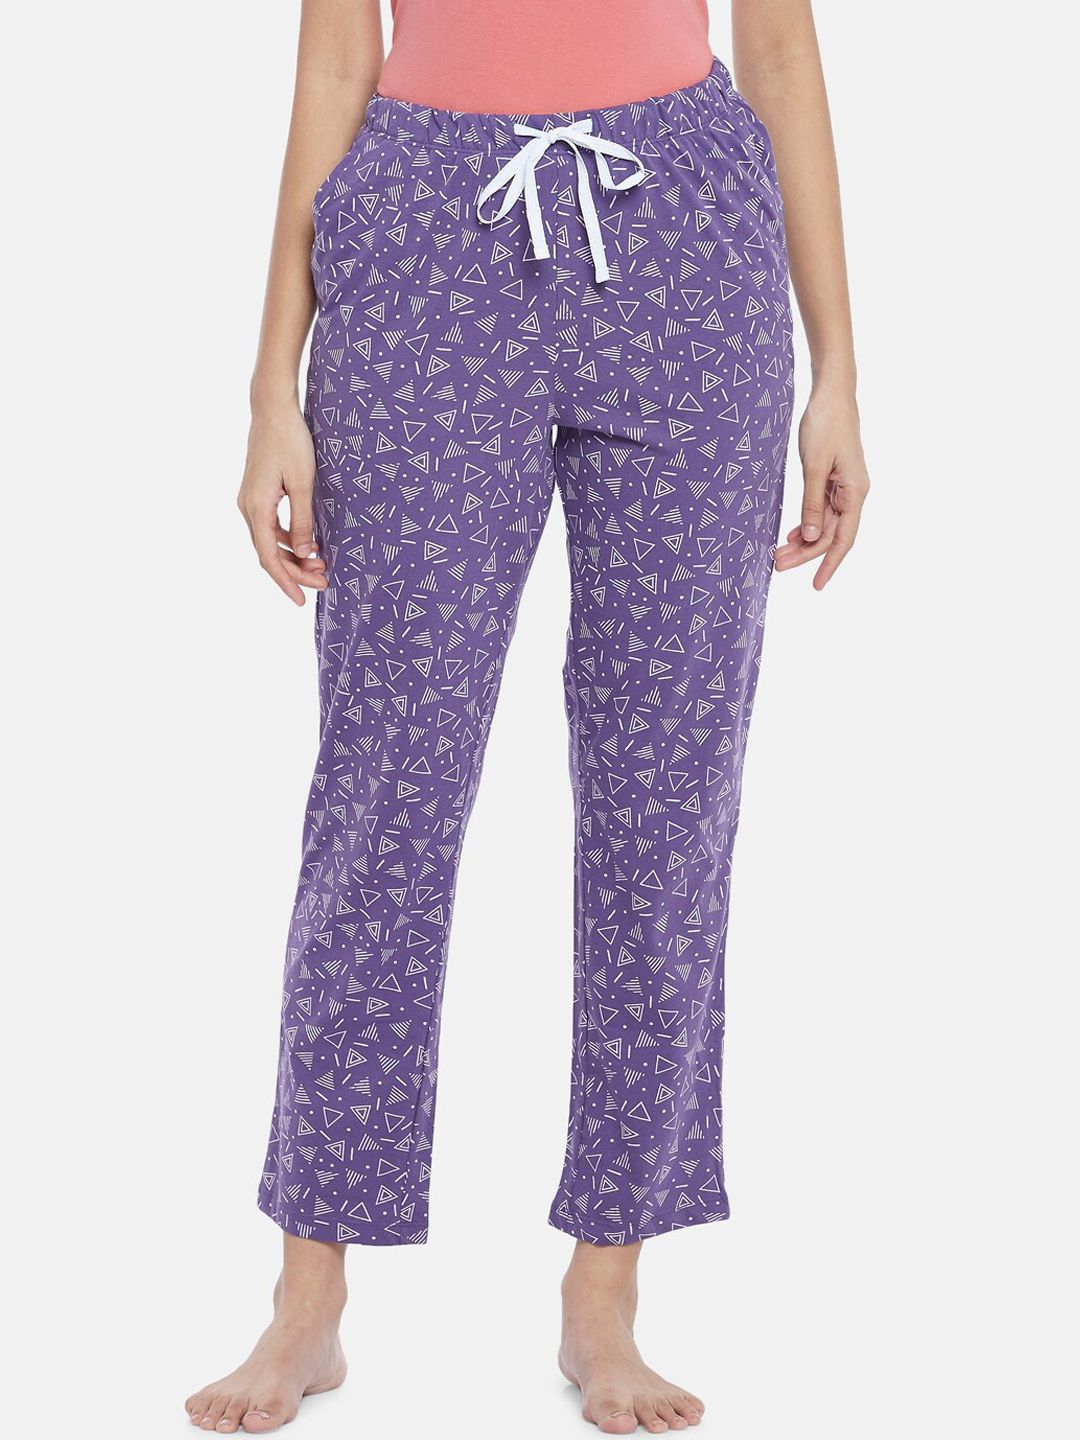 Dreamz by Pantaloons Women Purple Printed Cotton Lounge Pants Price in India